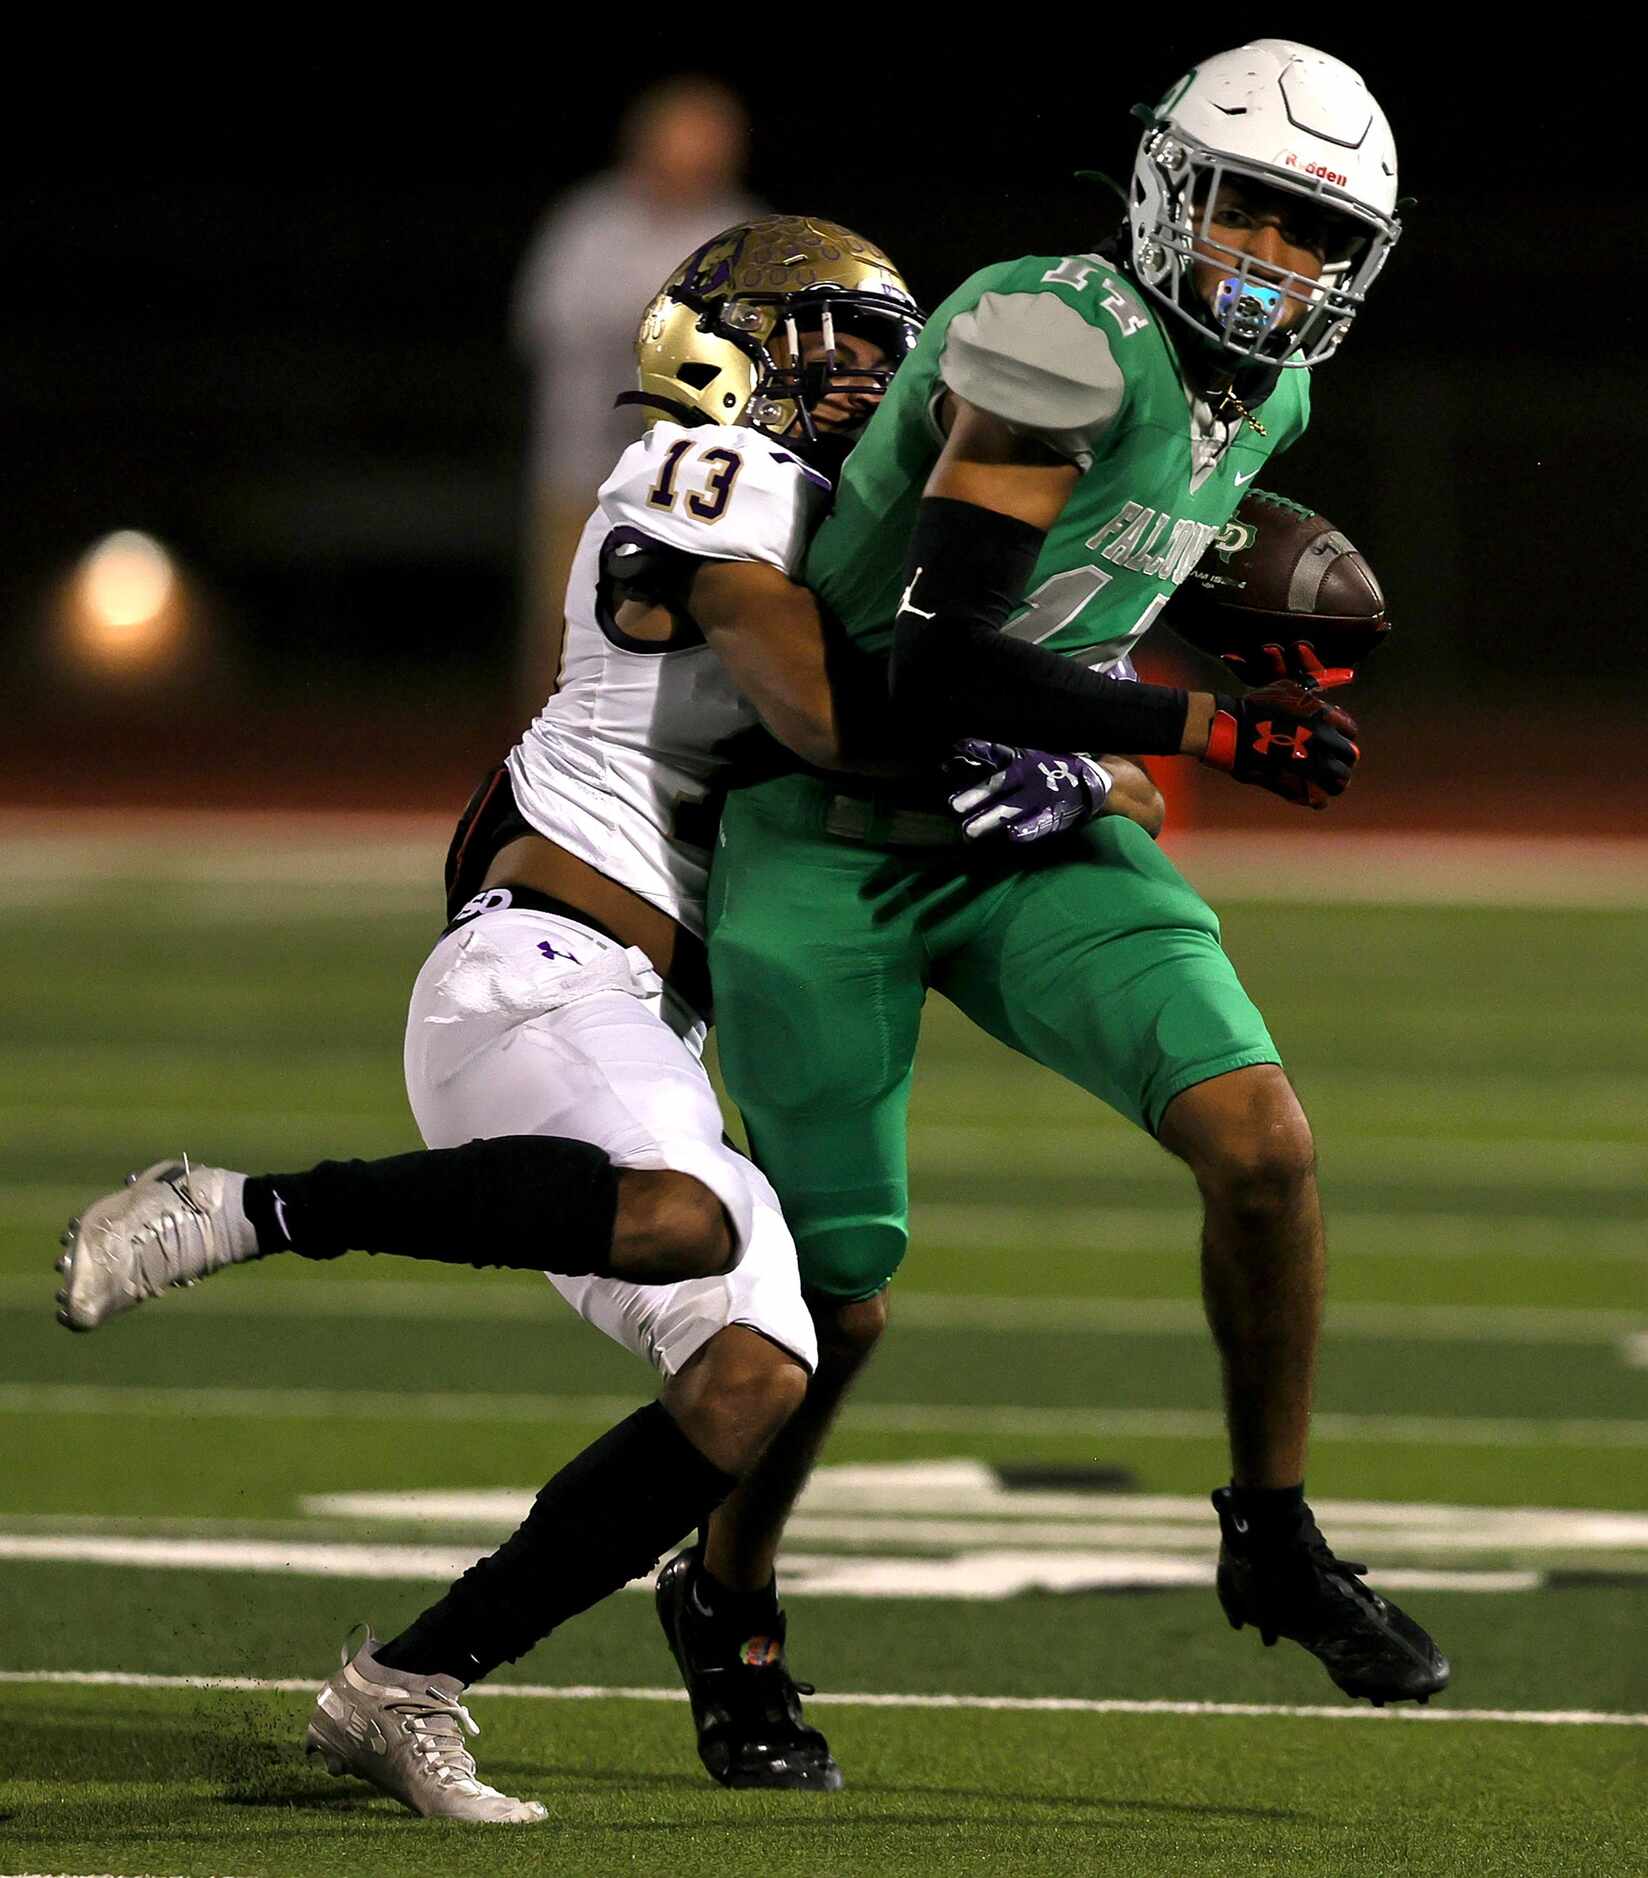 Lake Dallas wide receiver Evan Weinberg (14) comes up with a reception against Denton safety...